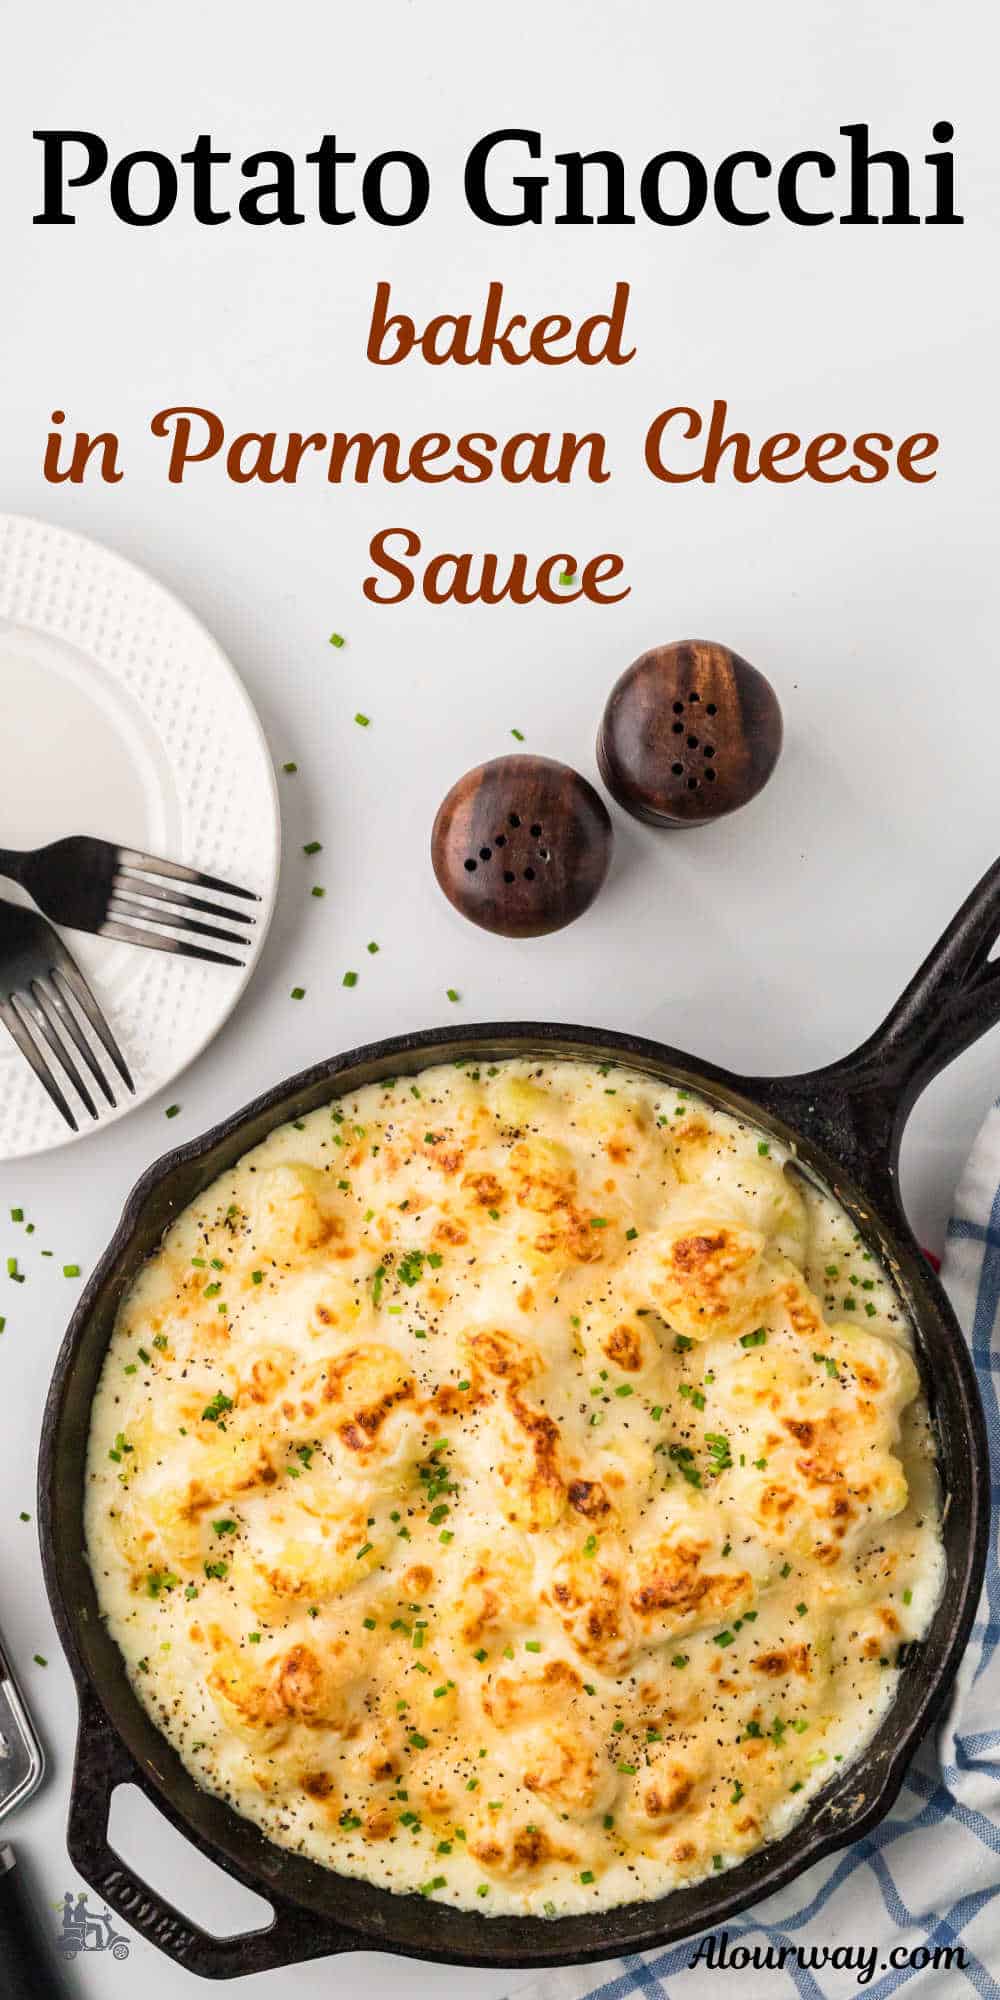 Get ready for a meatless dinner that will make your taste buds sing. This potato gnocchi in parmesan cream sauce is what dreams are made of. This family-friendly dinner will have your entire family begging for seconds, and the luxuriously smooth parmesan cream sauce is pure perfection.